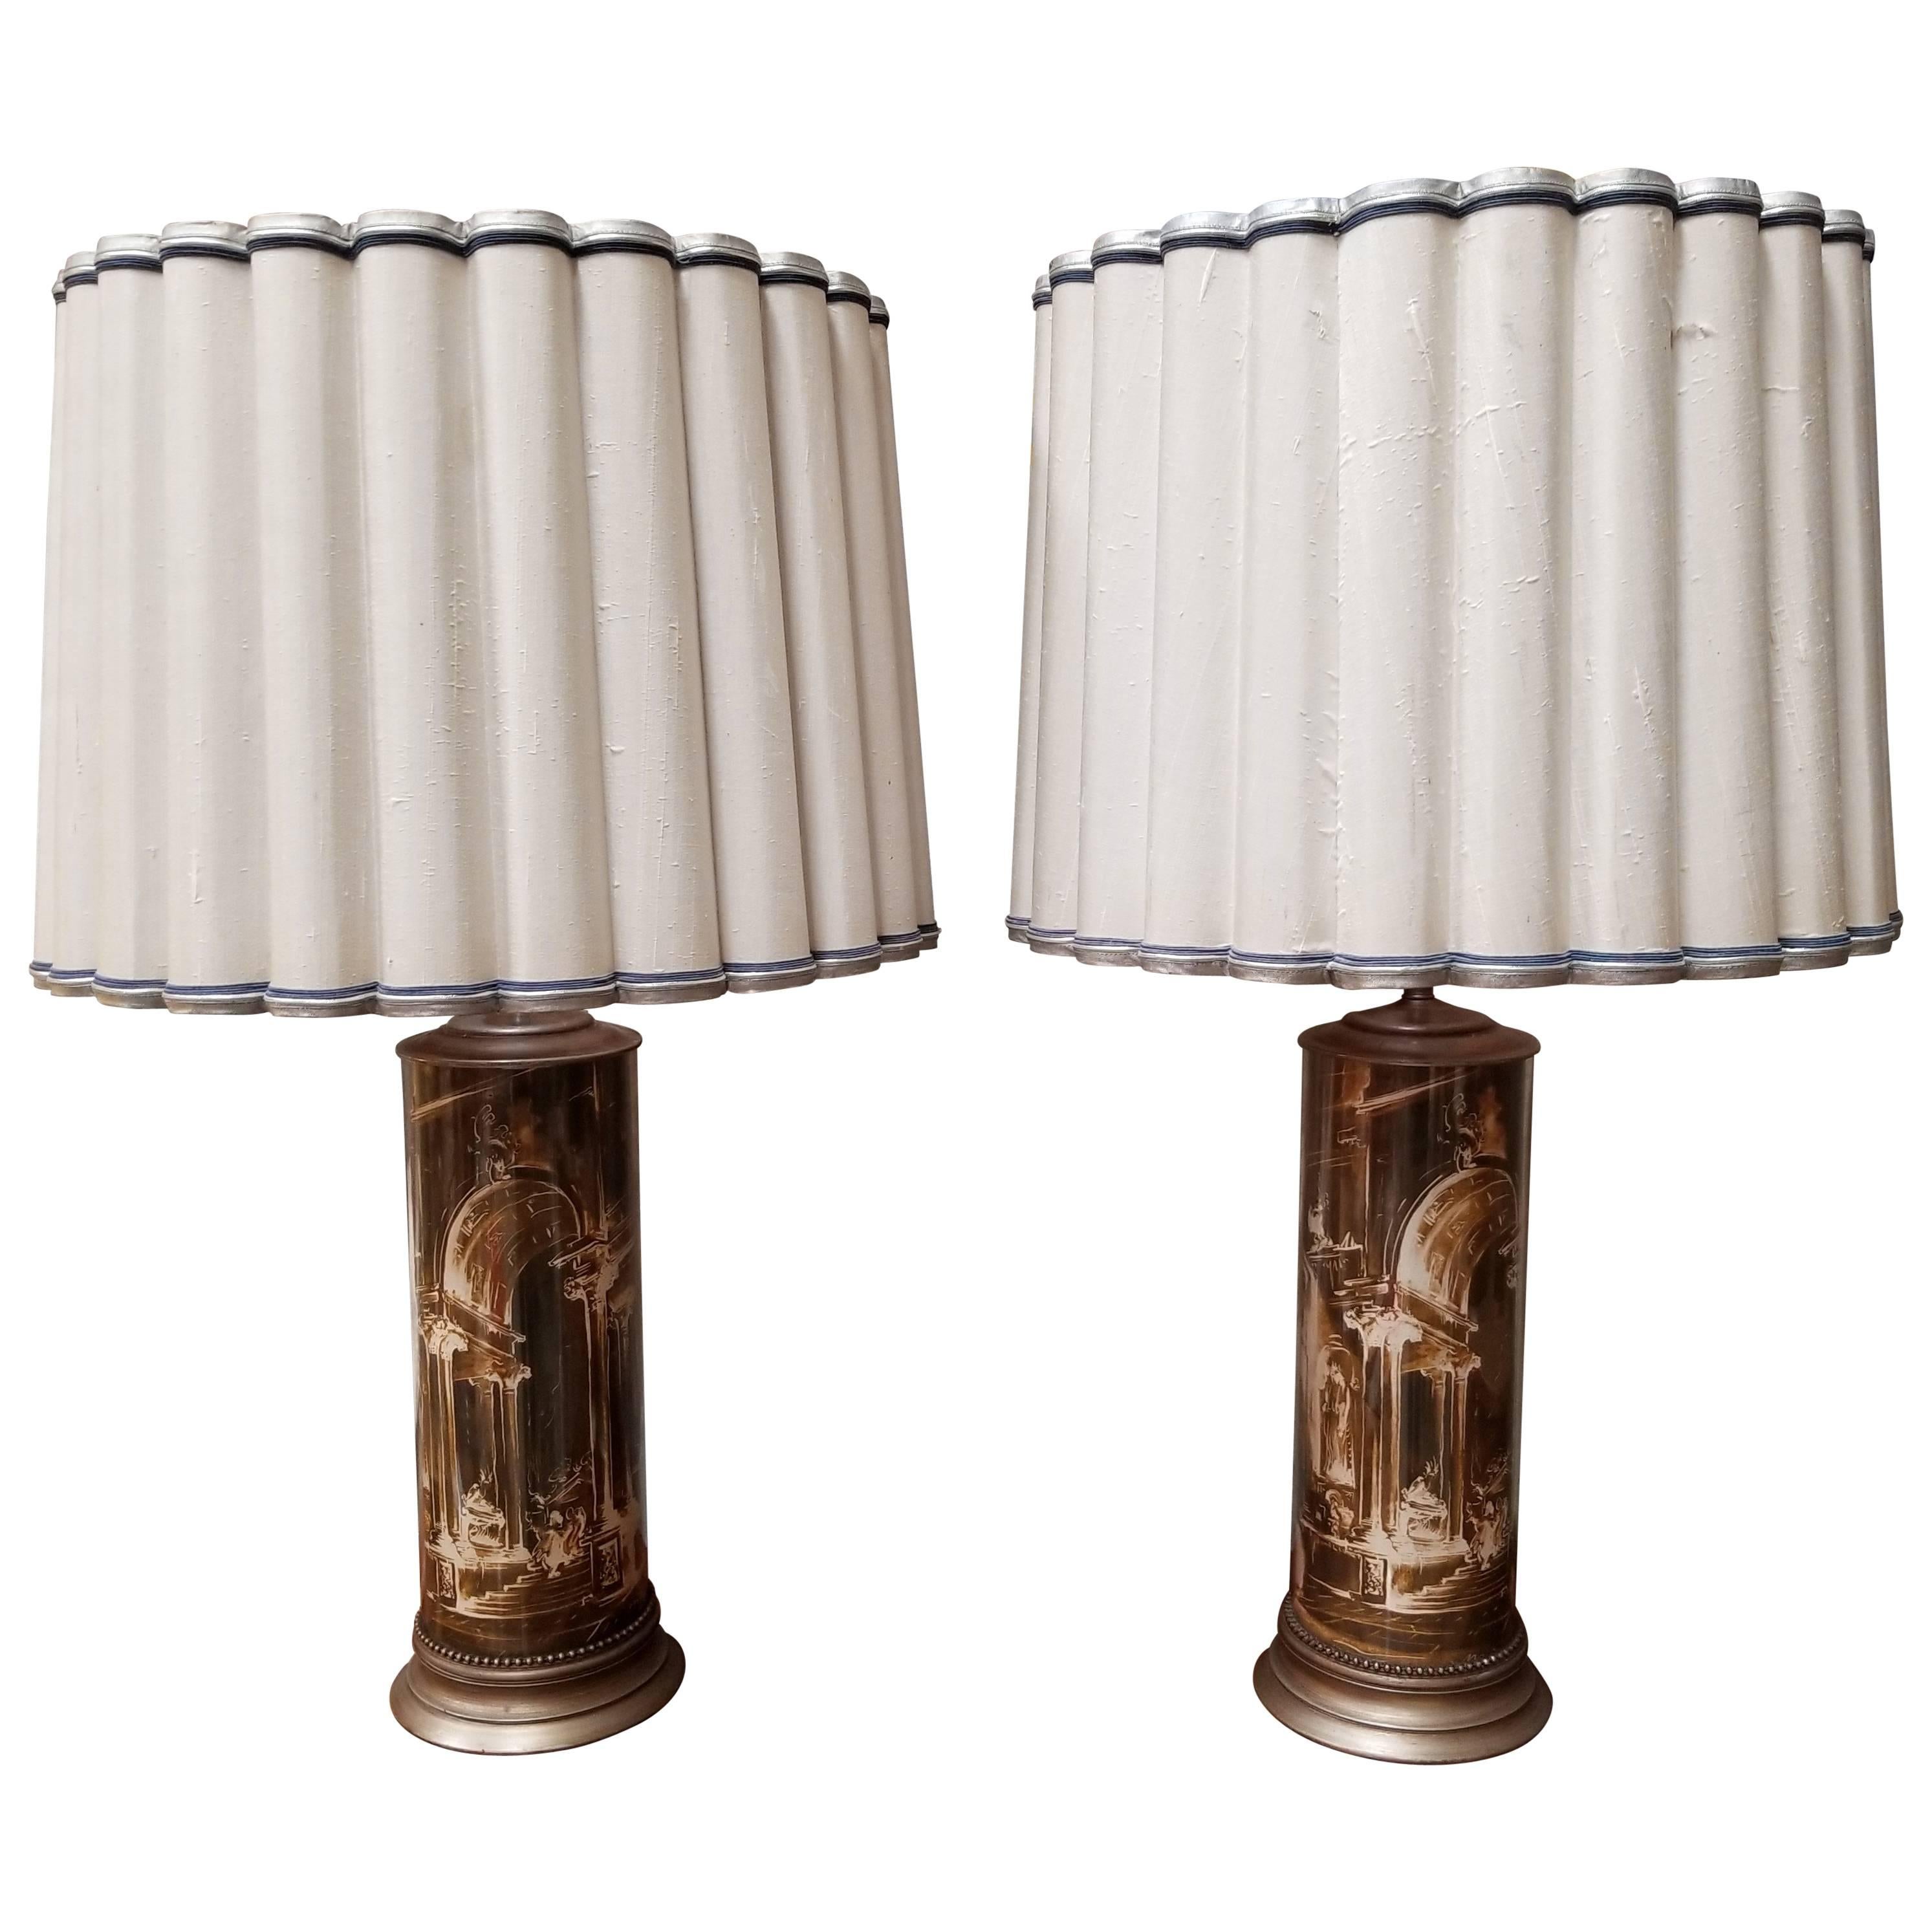 Piero Fornasetti Style Lamps Depicting Ancient Architecture